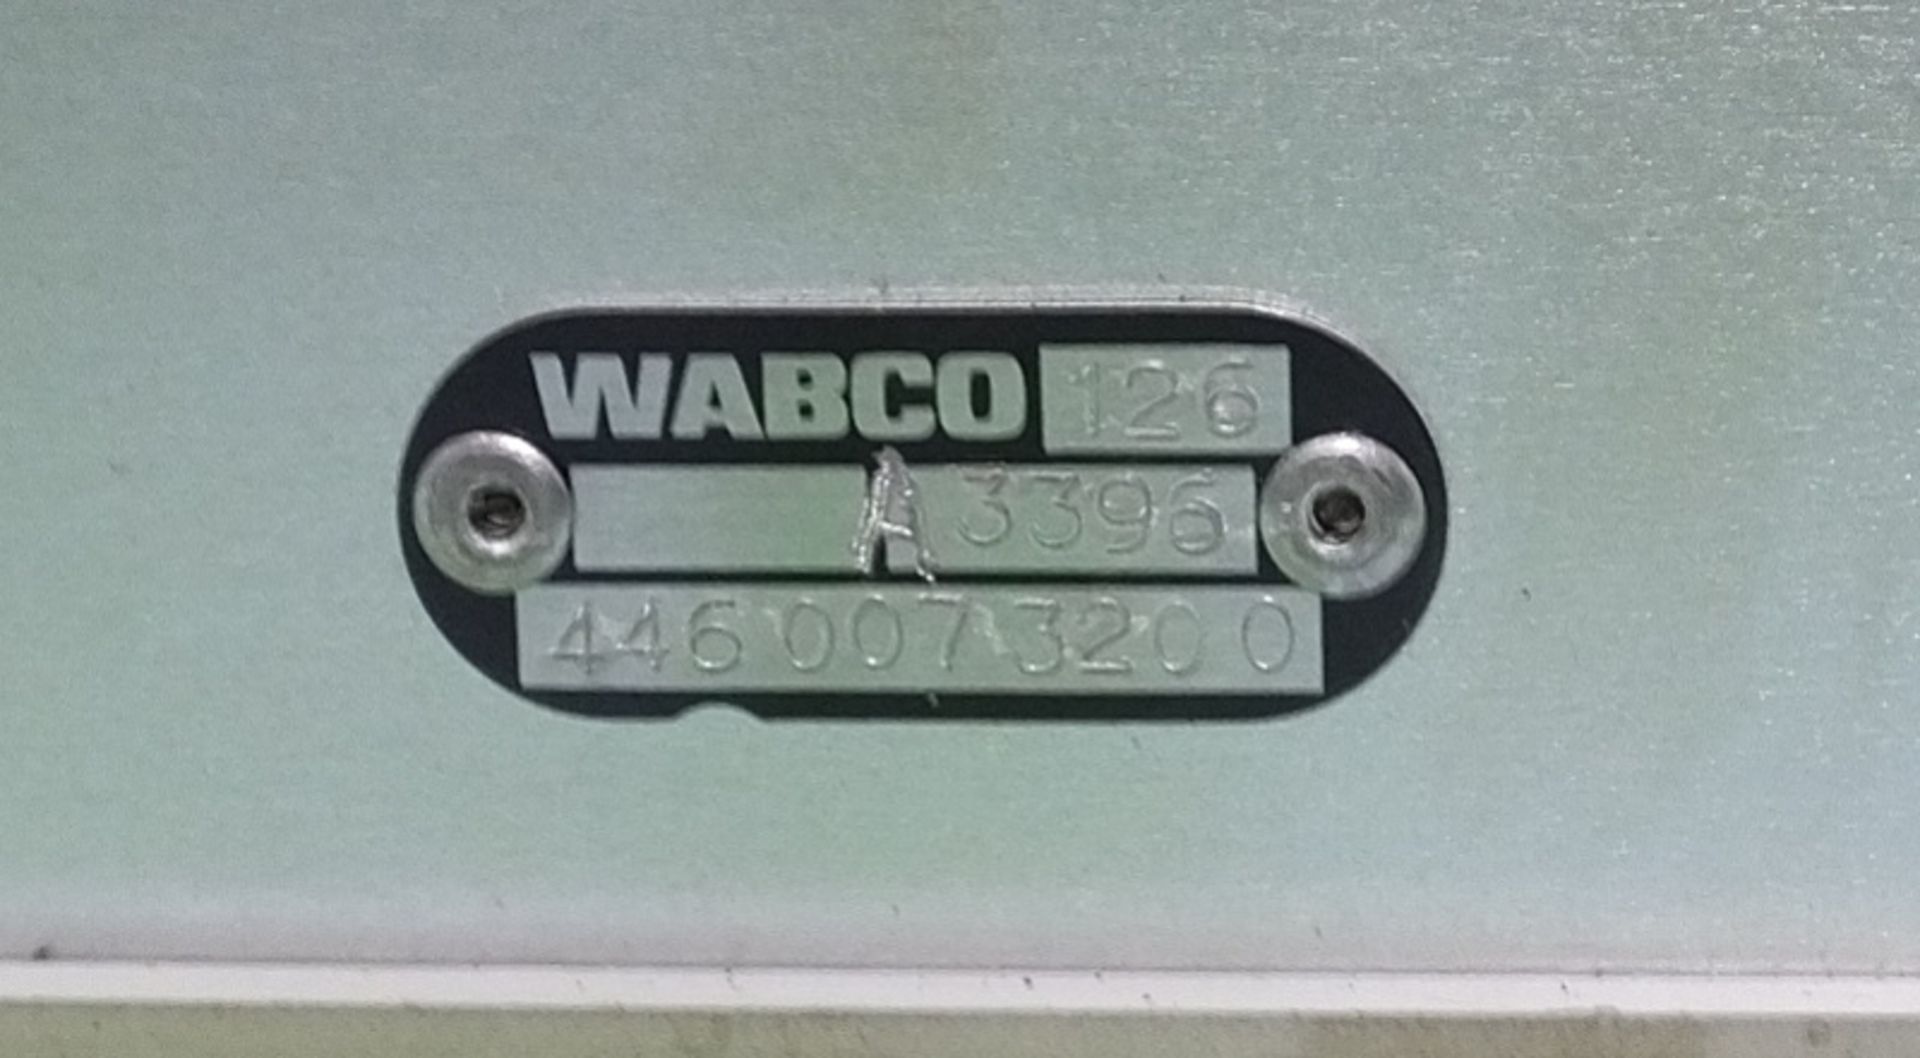 Wabco 446 300 320 0 ABS diagnostic controller kit - Image 5 of 5